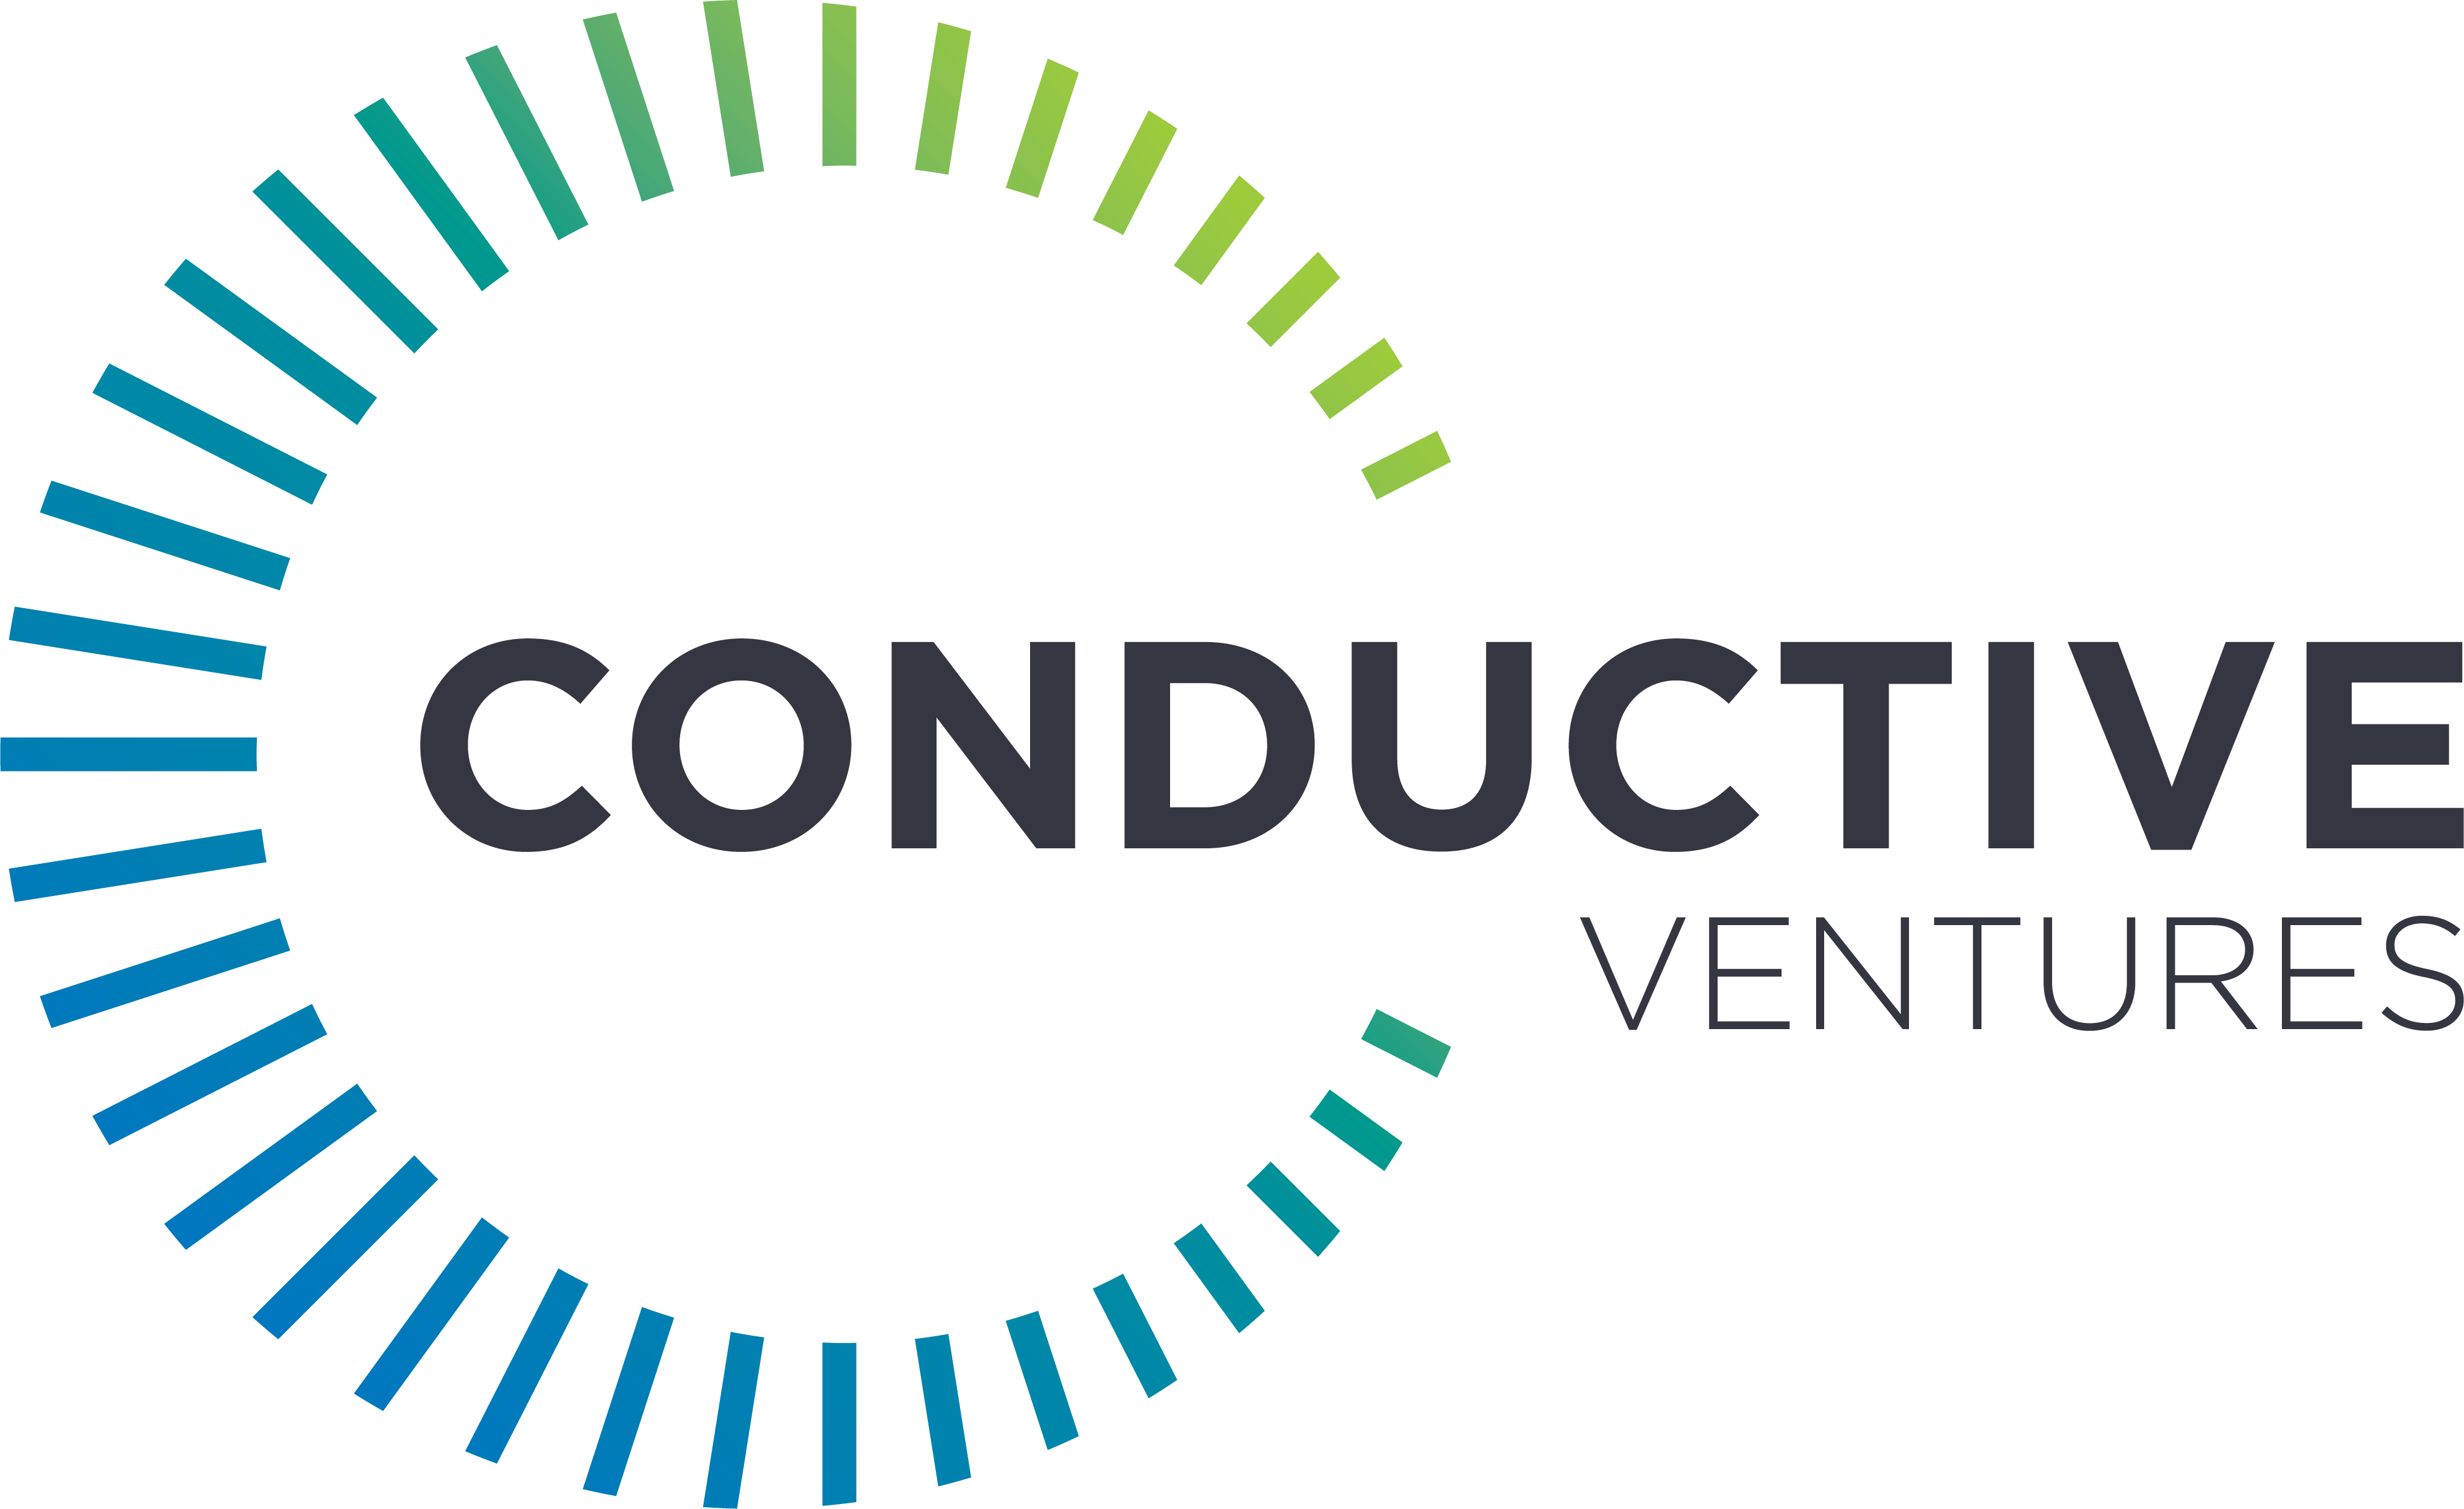 Google Ventures Logo - Conductive Ventures. Delivering Capital and Value to Build Next